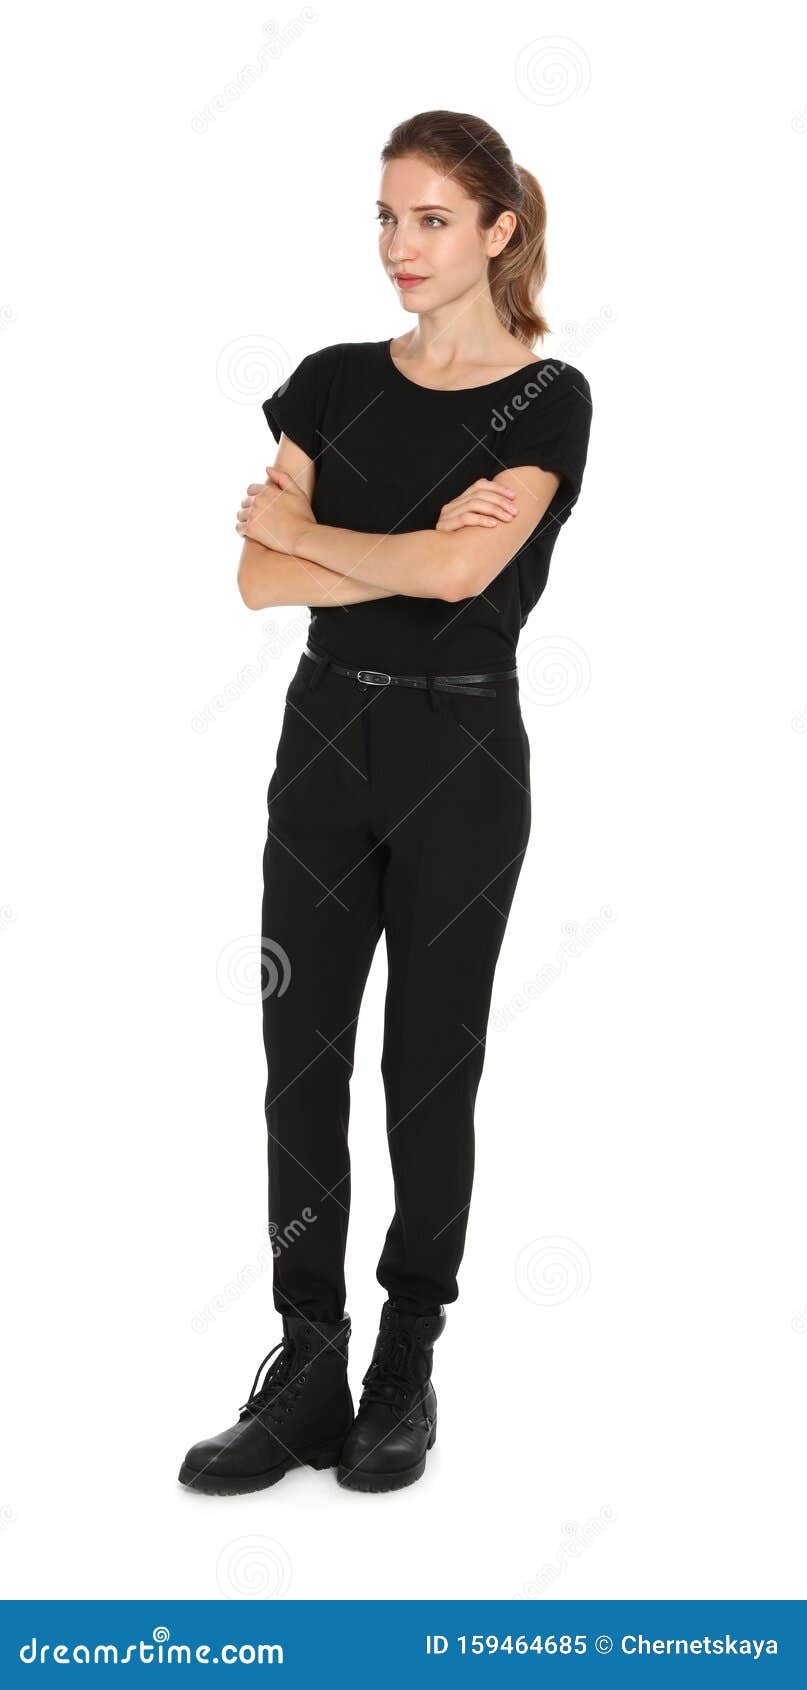 Female Security Guard In Uniform Stock Image Image Of Security